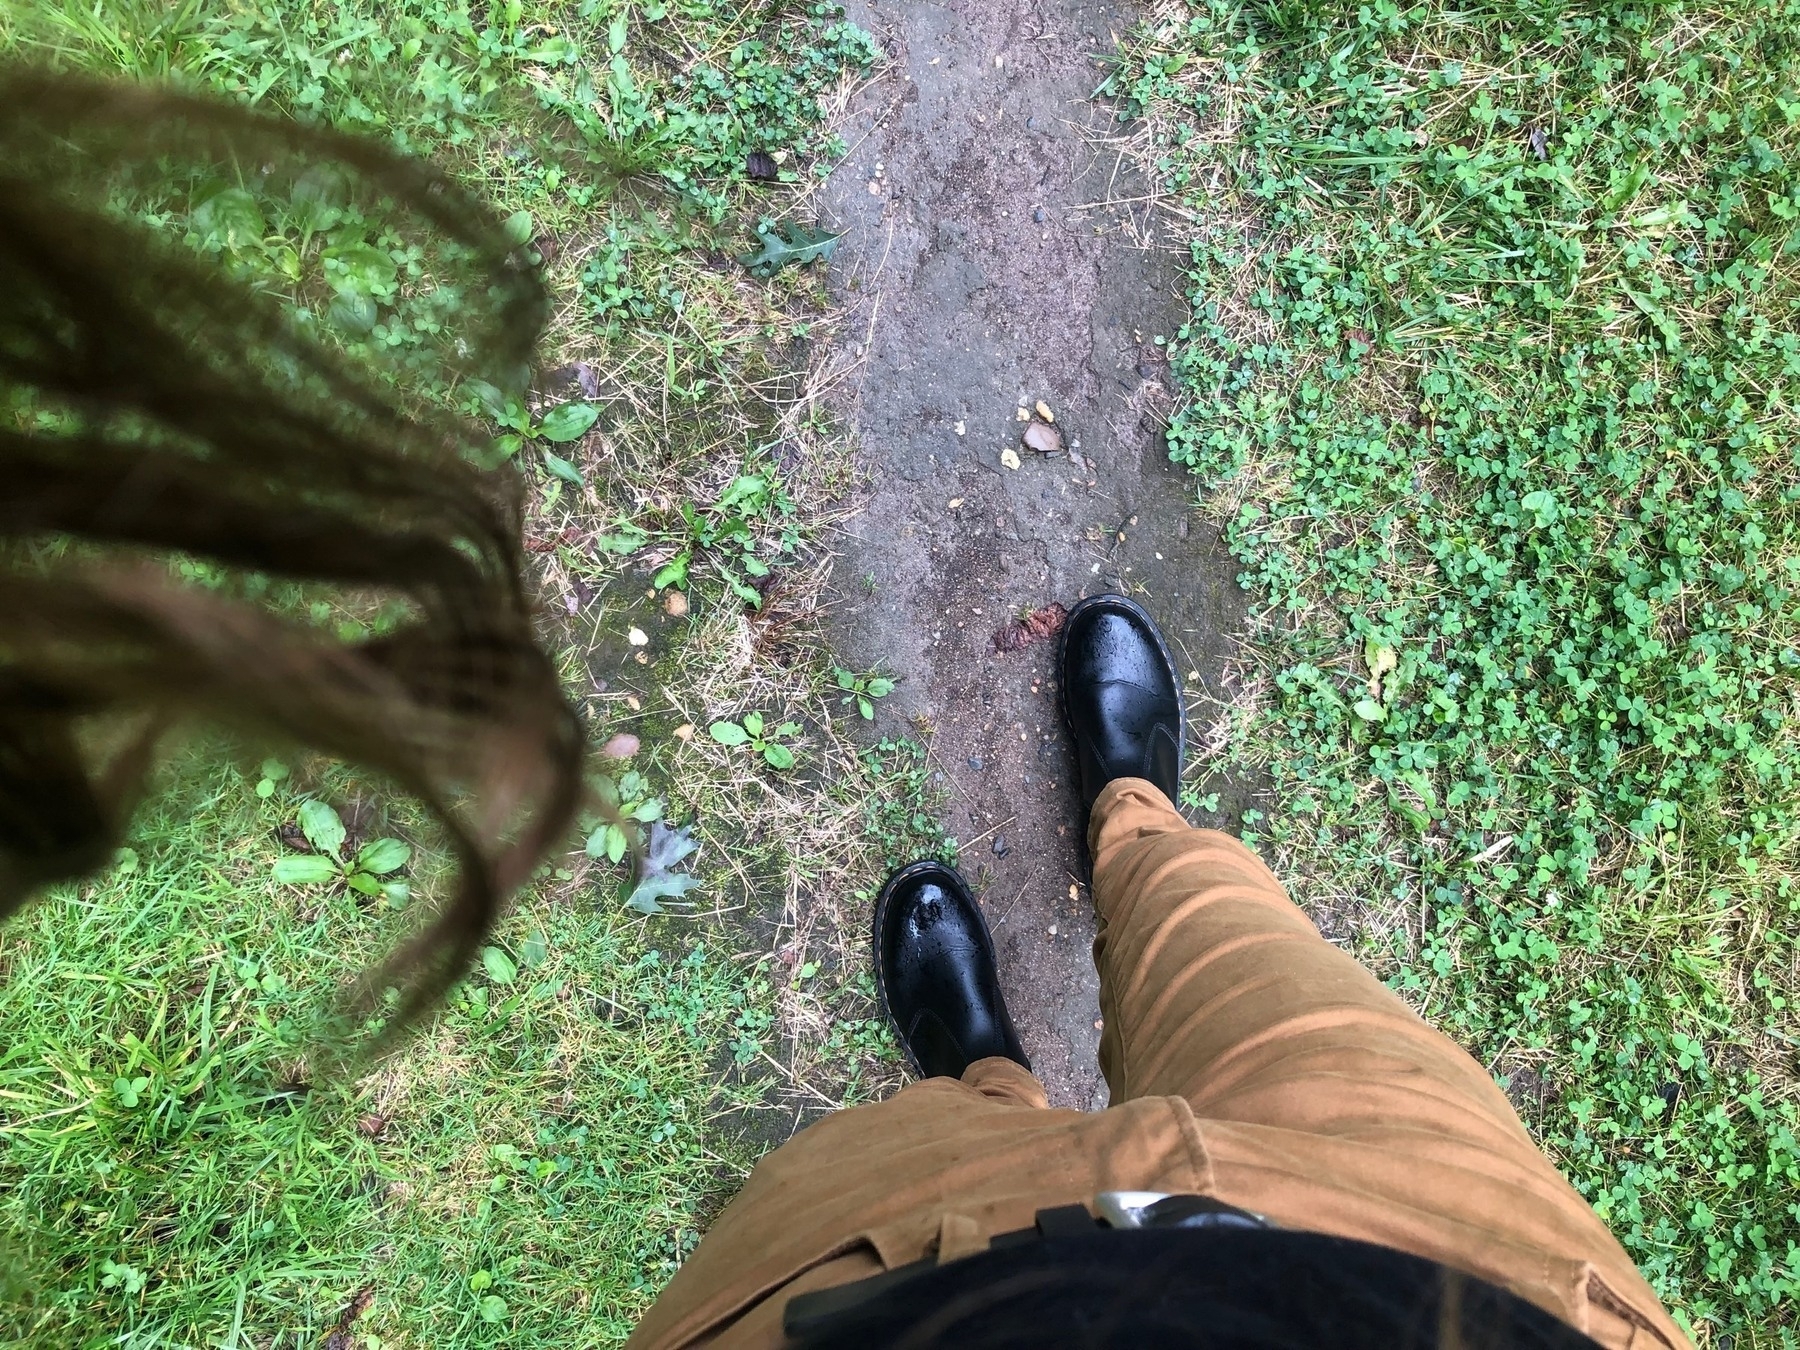 From Hunter's POV: hair hanging down, a pair of rain boots, a footpath underfoot.